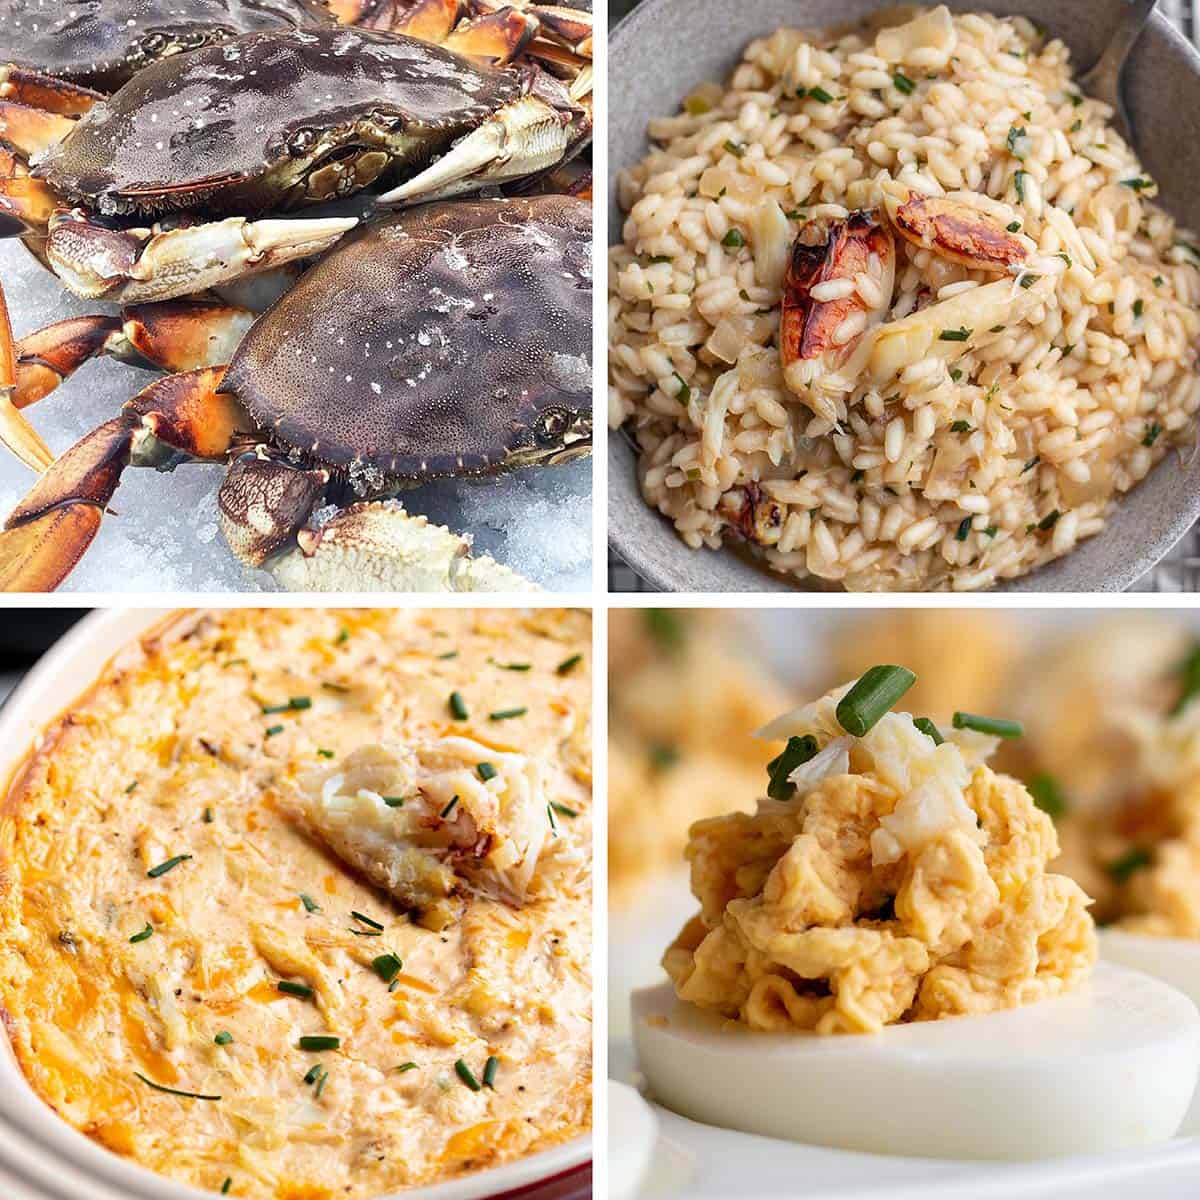 Four images: One with Dungeness crab, crab risotto, crab dip and crab deviled eggs.